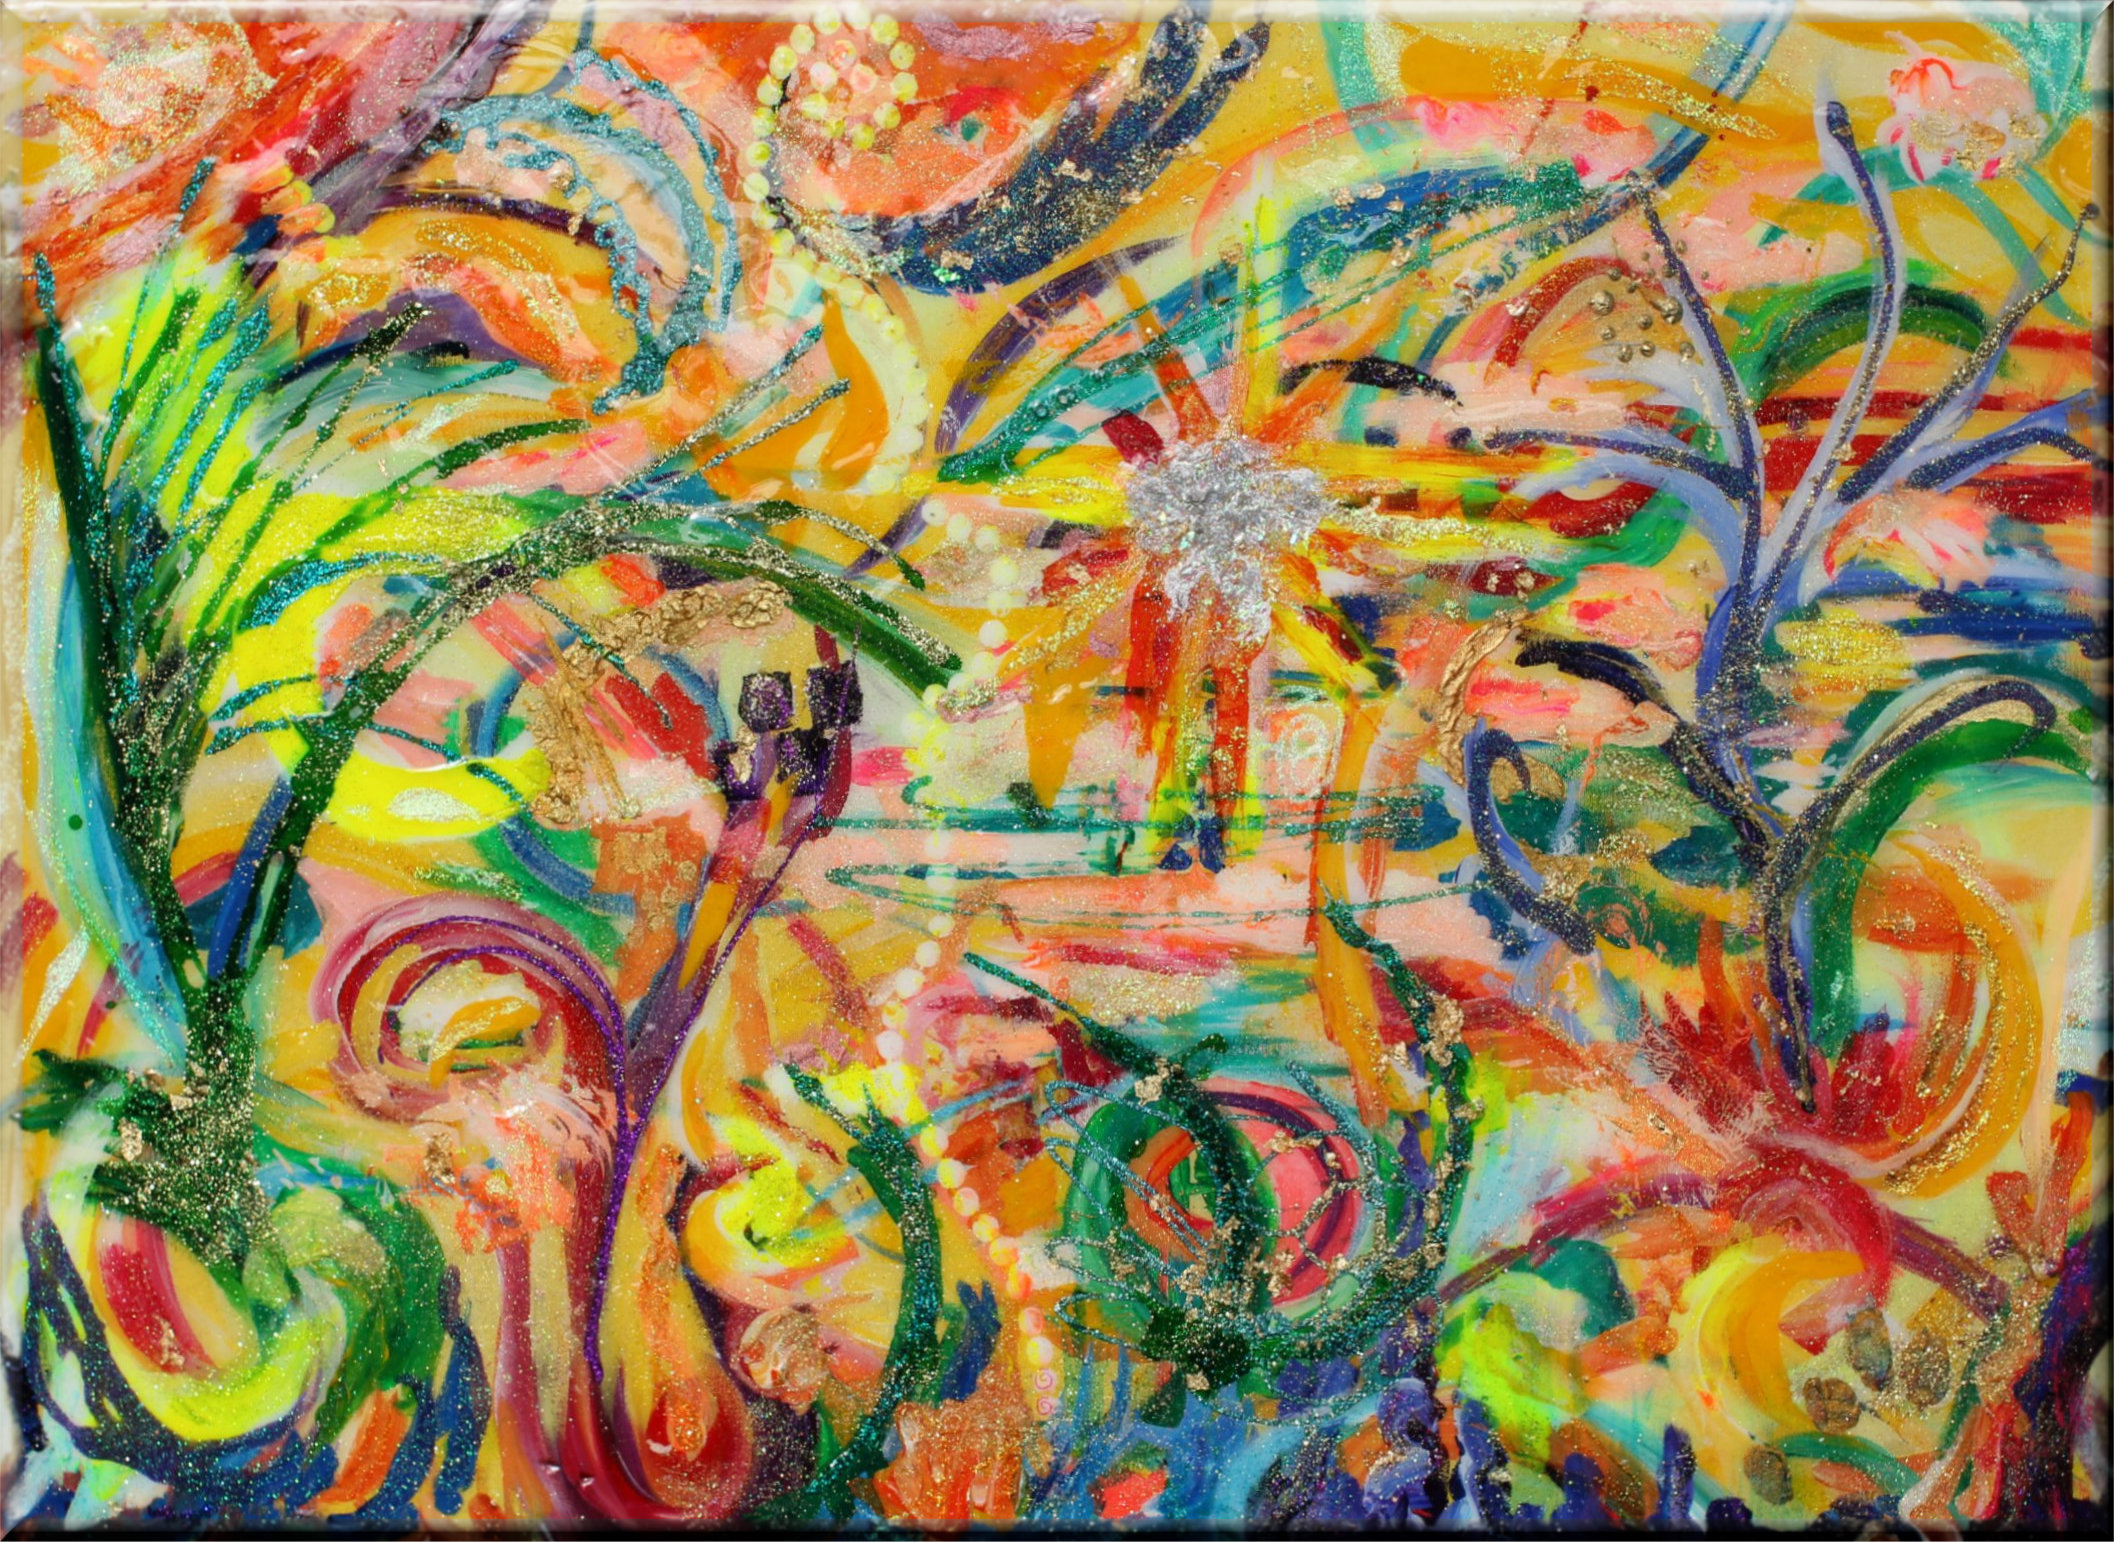 Colorful Dynamic Energy Art Painting "Project Sanctuary" by Silvia Hartmann